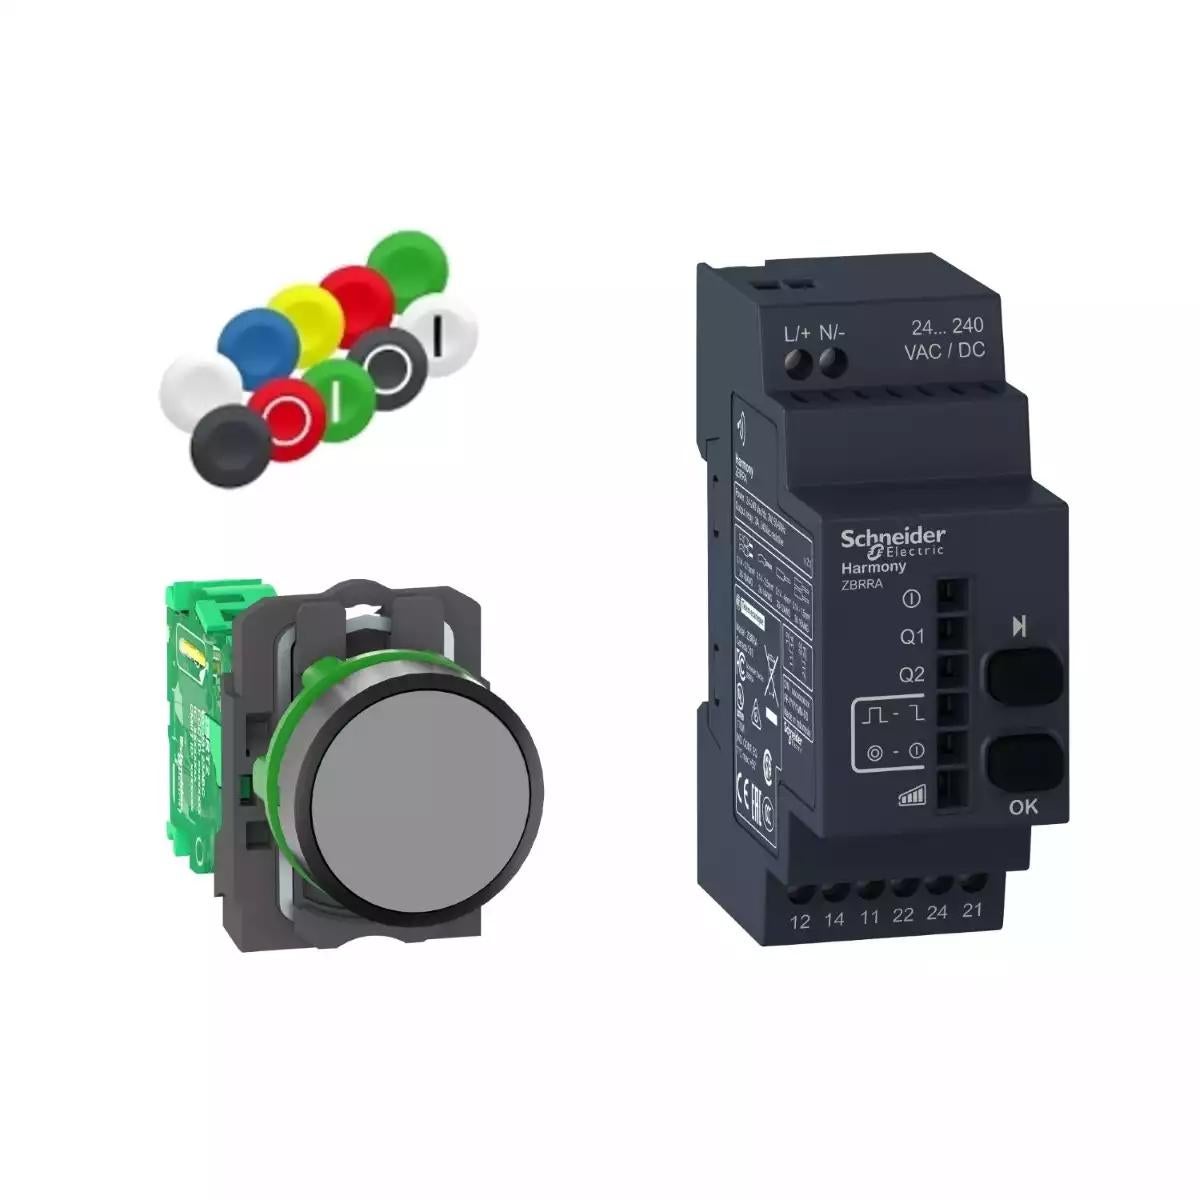 Harmony XB5, Wireless push button and configurable receiver with 10 colored caps, plastic, Ø22, 24...240 V AC/DC